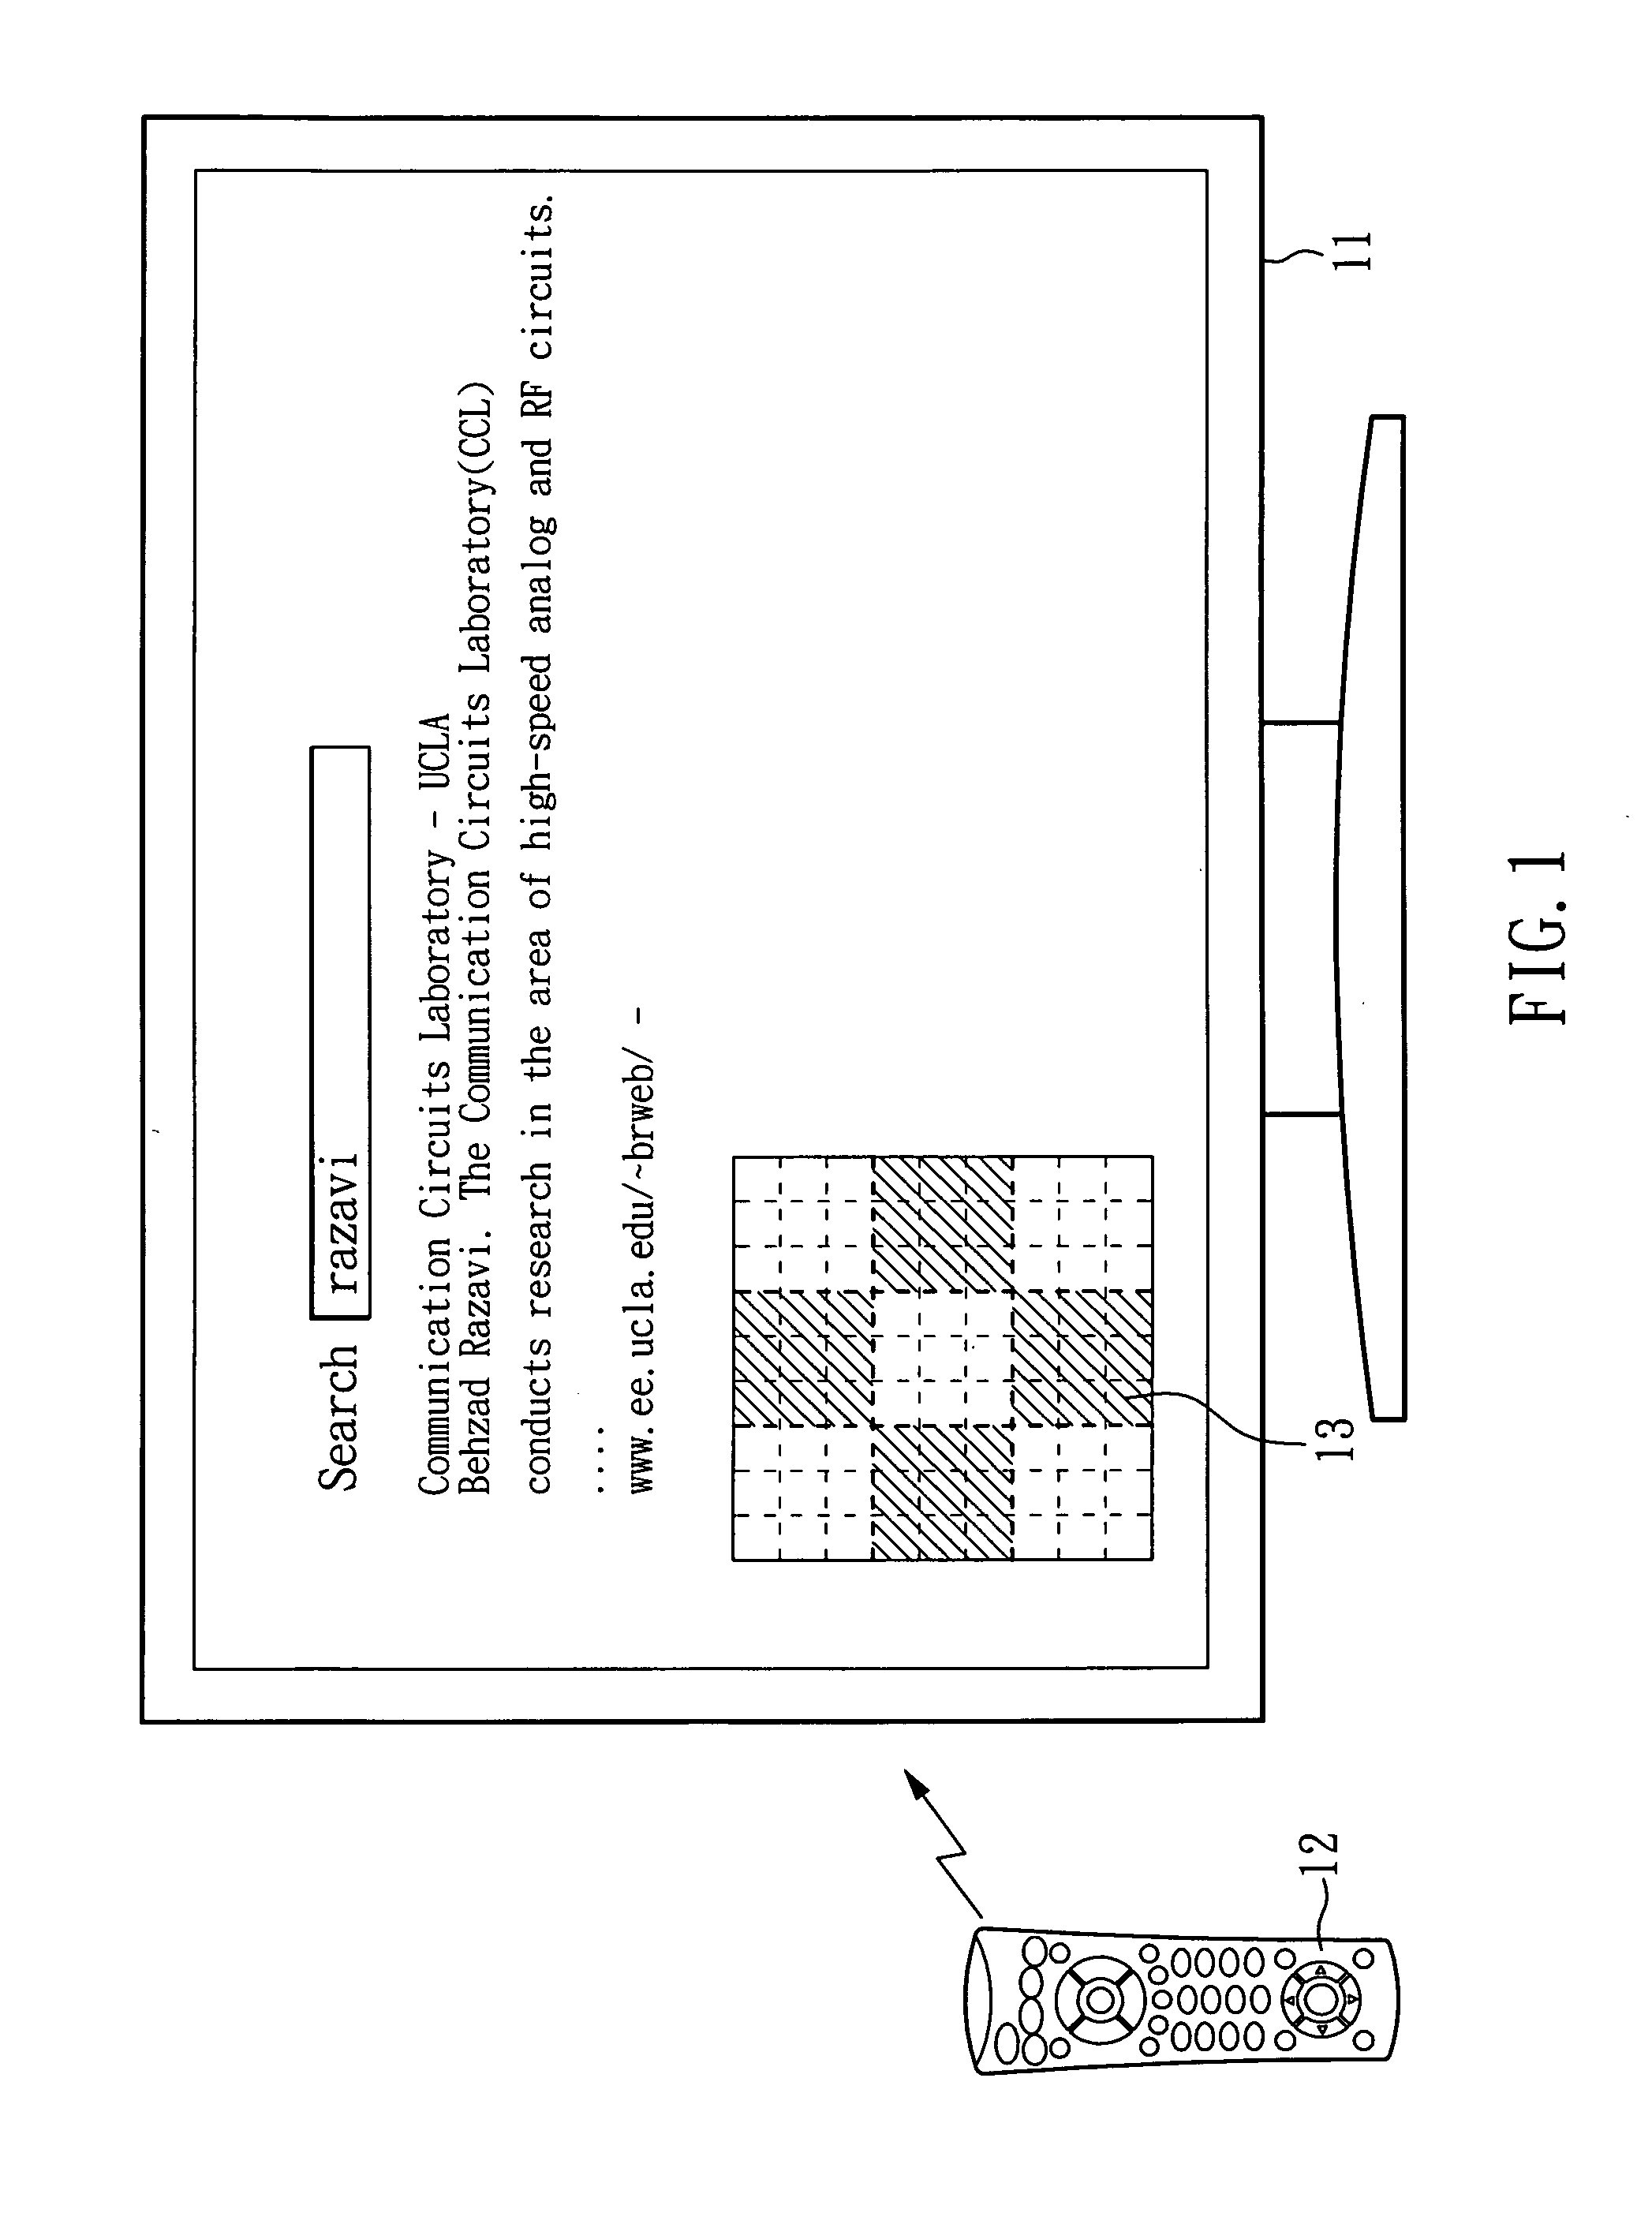 Nine-square virtual input system using a remote control